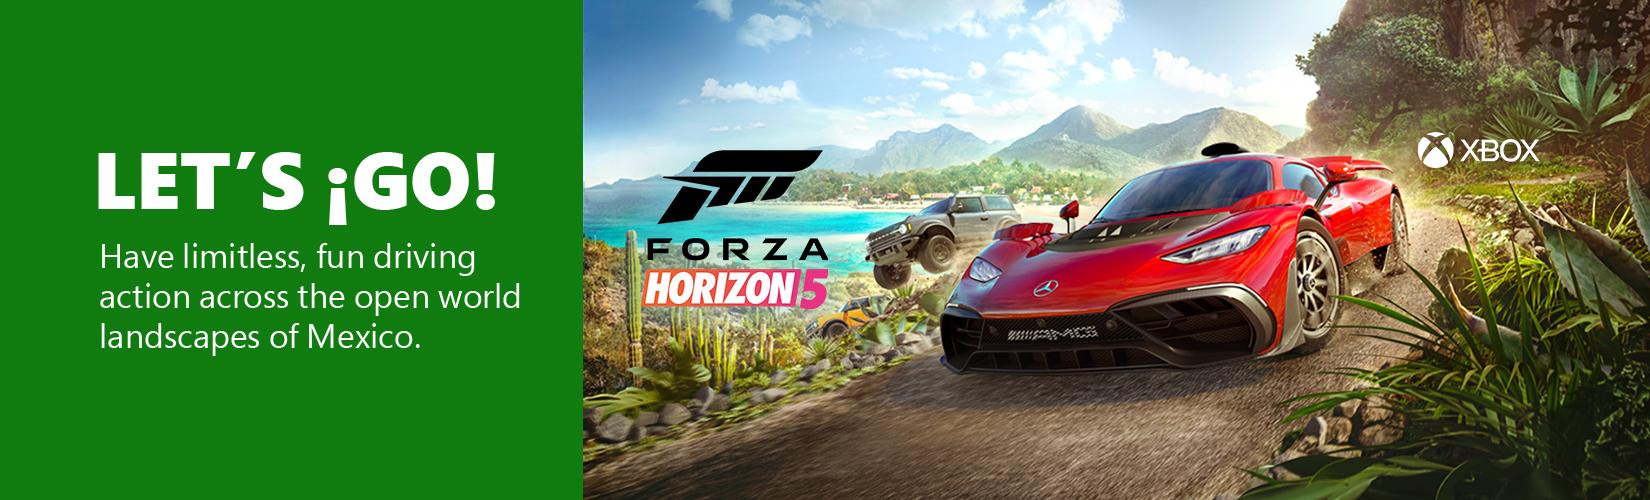 Forza Horizon 5. Let's Go! Have limitless, fun driving action across the open world landscapes of Mexico.